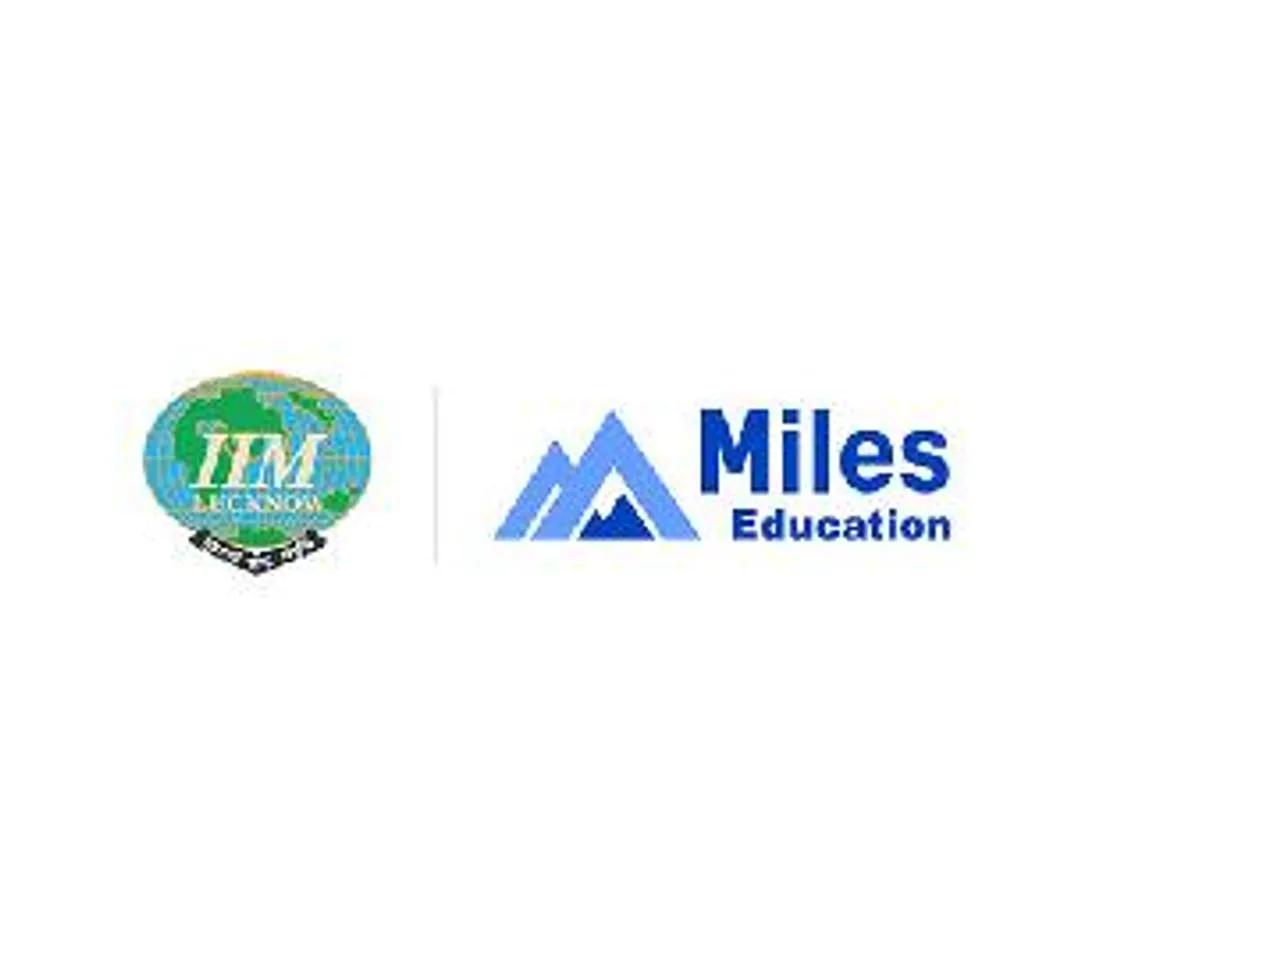 IIM Lucknow in Partnership With Miles Education Announces an Executive Programme in Digital Finance Transformation